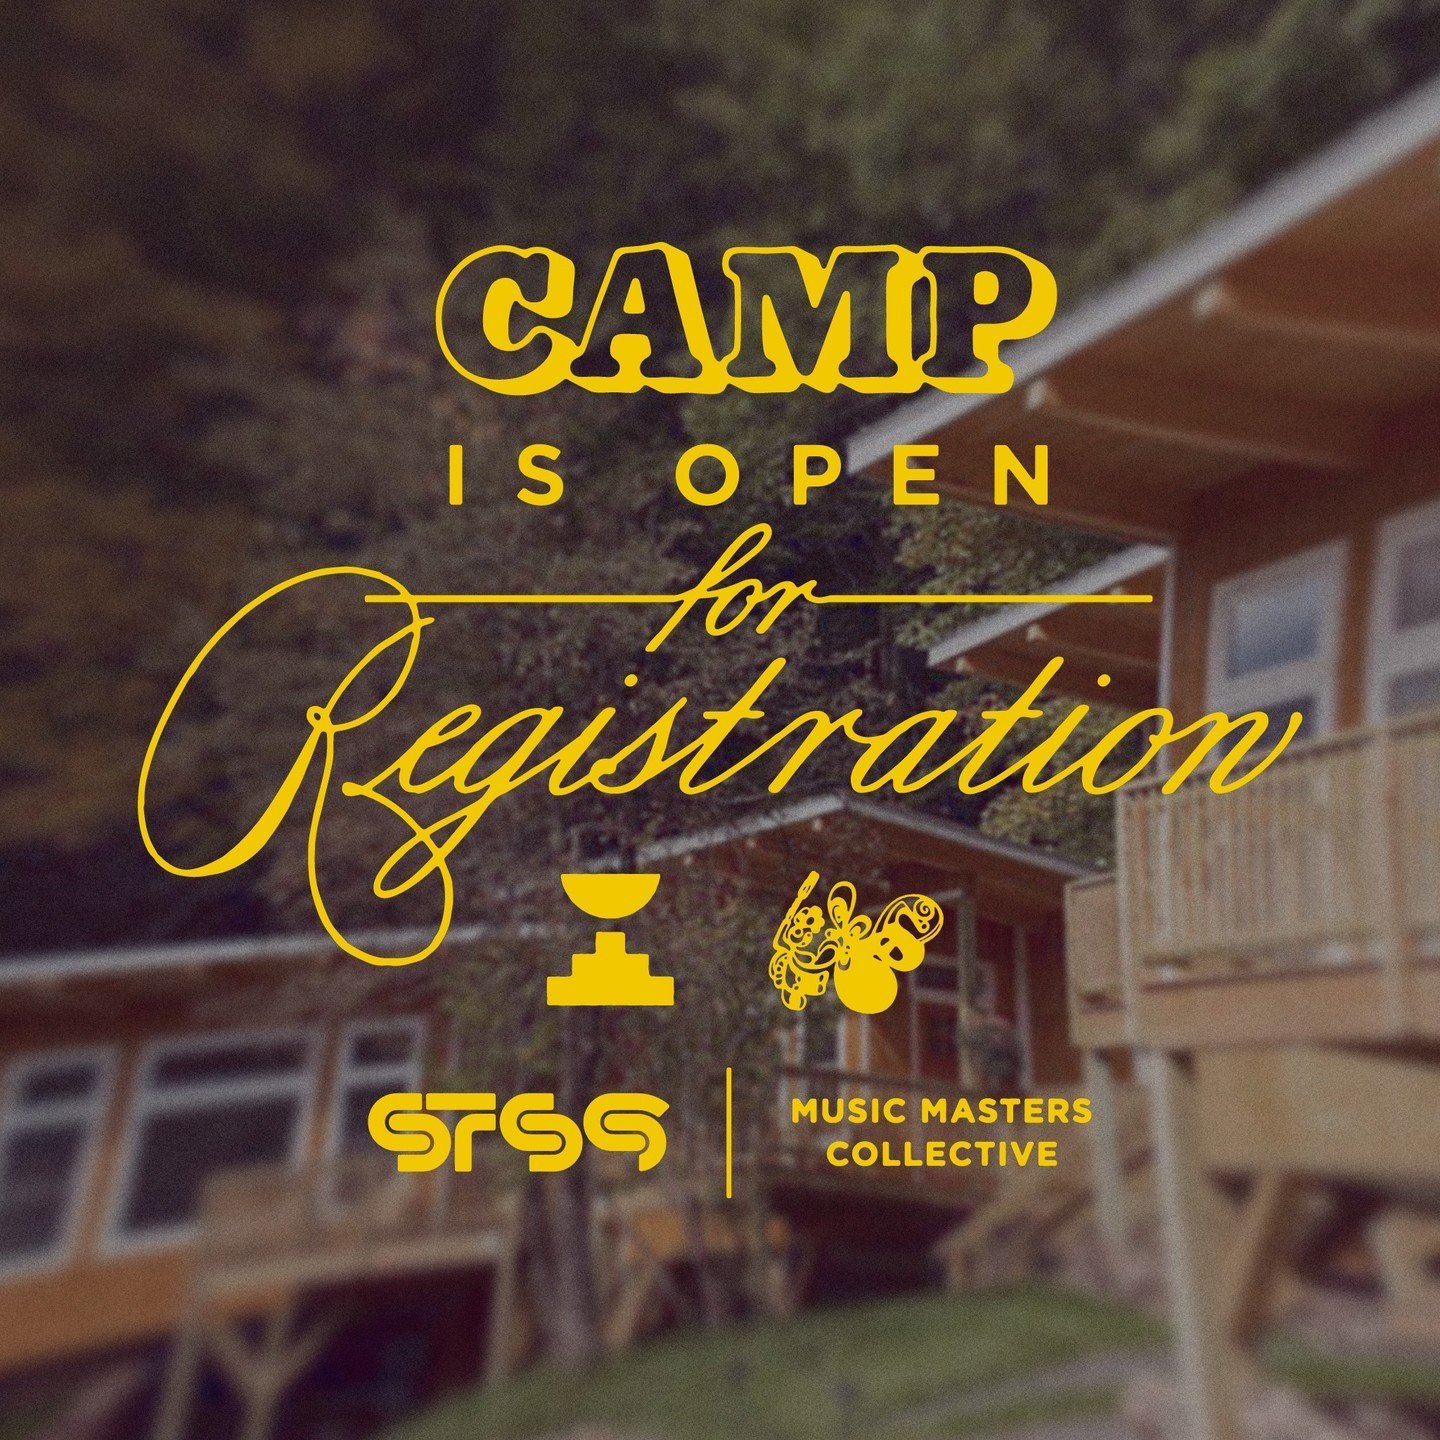 Registration is now OPEN! Don't miss out on your chance to be a part of magic at Camp Elsewhere, STS9's Most Intimate Experiential Event to date! ✨⁠
⁠
Take a trip beyond backstage and peek into their creative process. The experience will include: 6 I